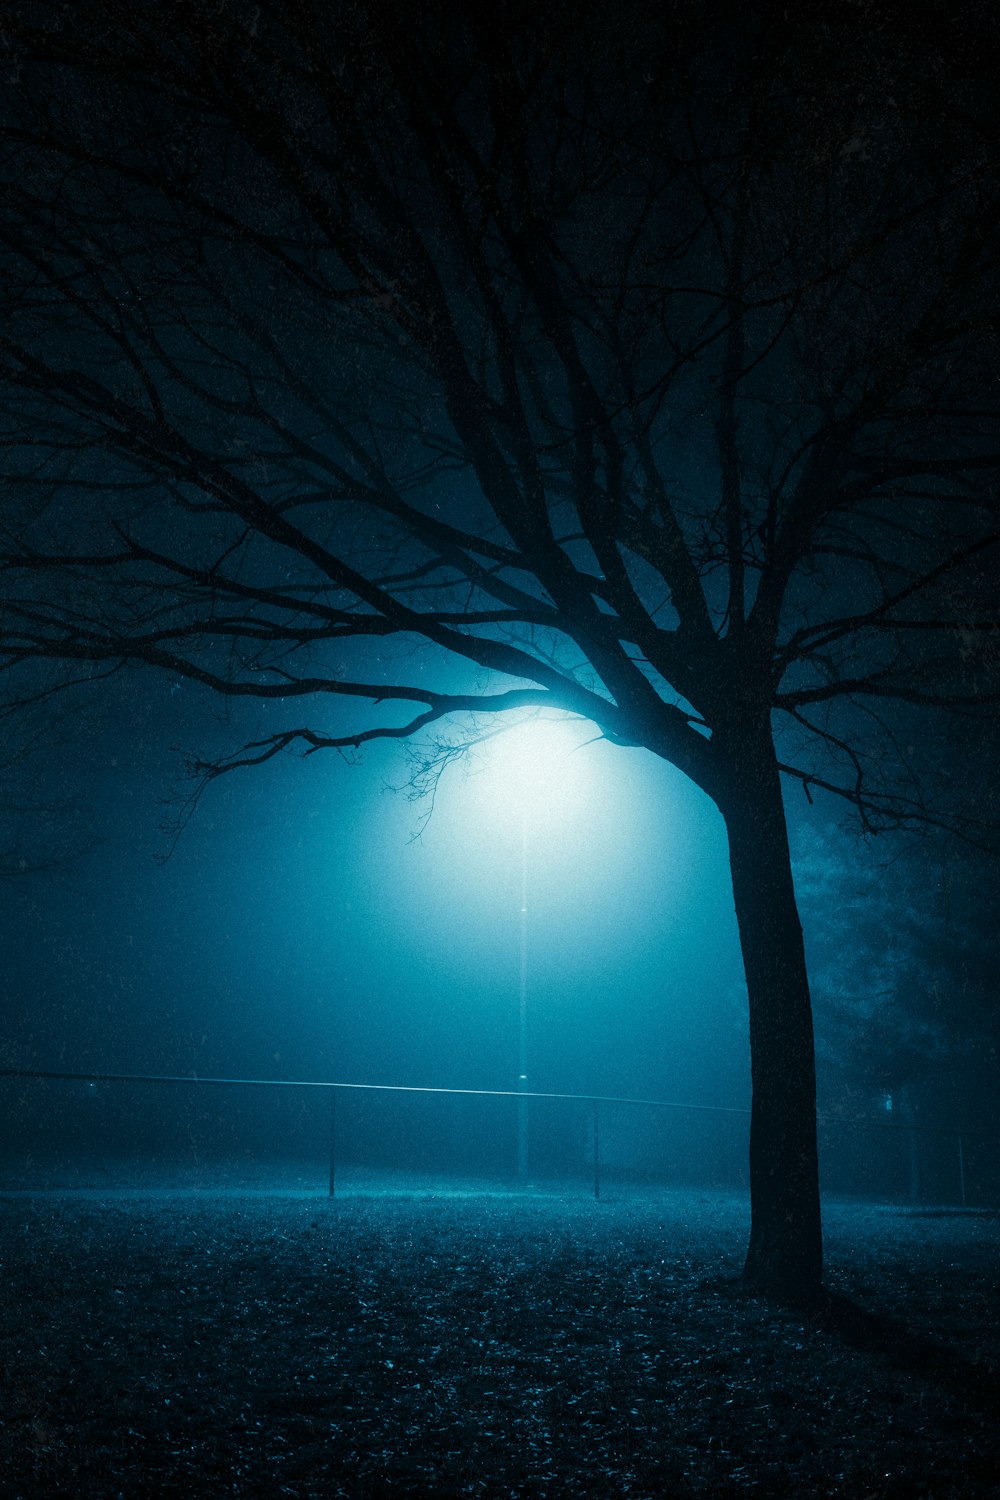 a tree in a park at night with a street light in the background